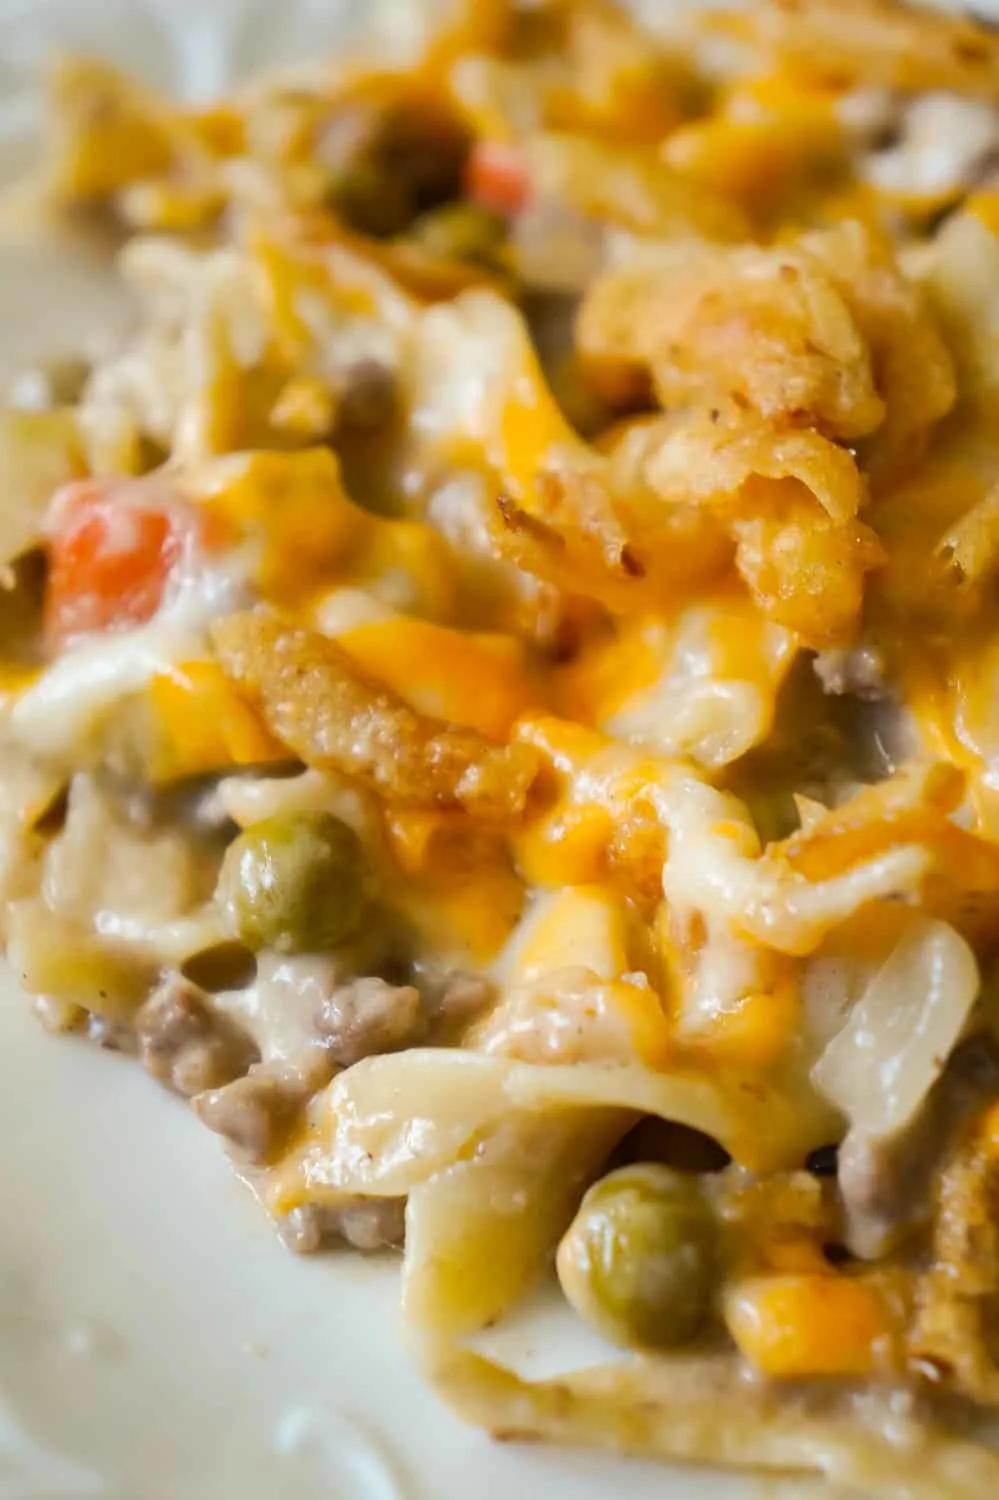 Hamburger Noodle Casserole is an easy ground beef casserole recipe loaded with egg noodles, veggies, cheese and crispy fried onions.